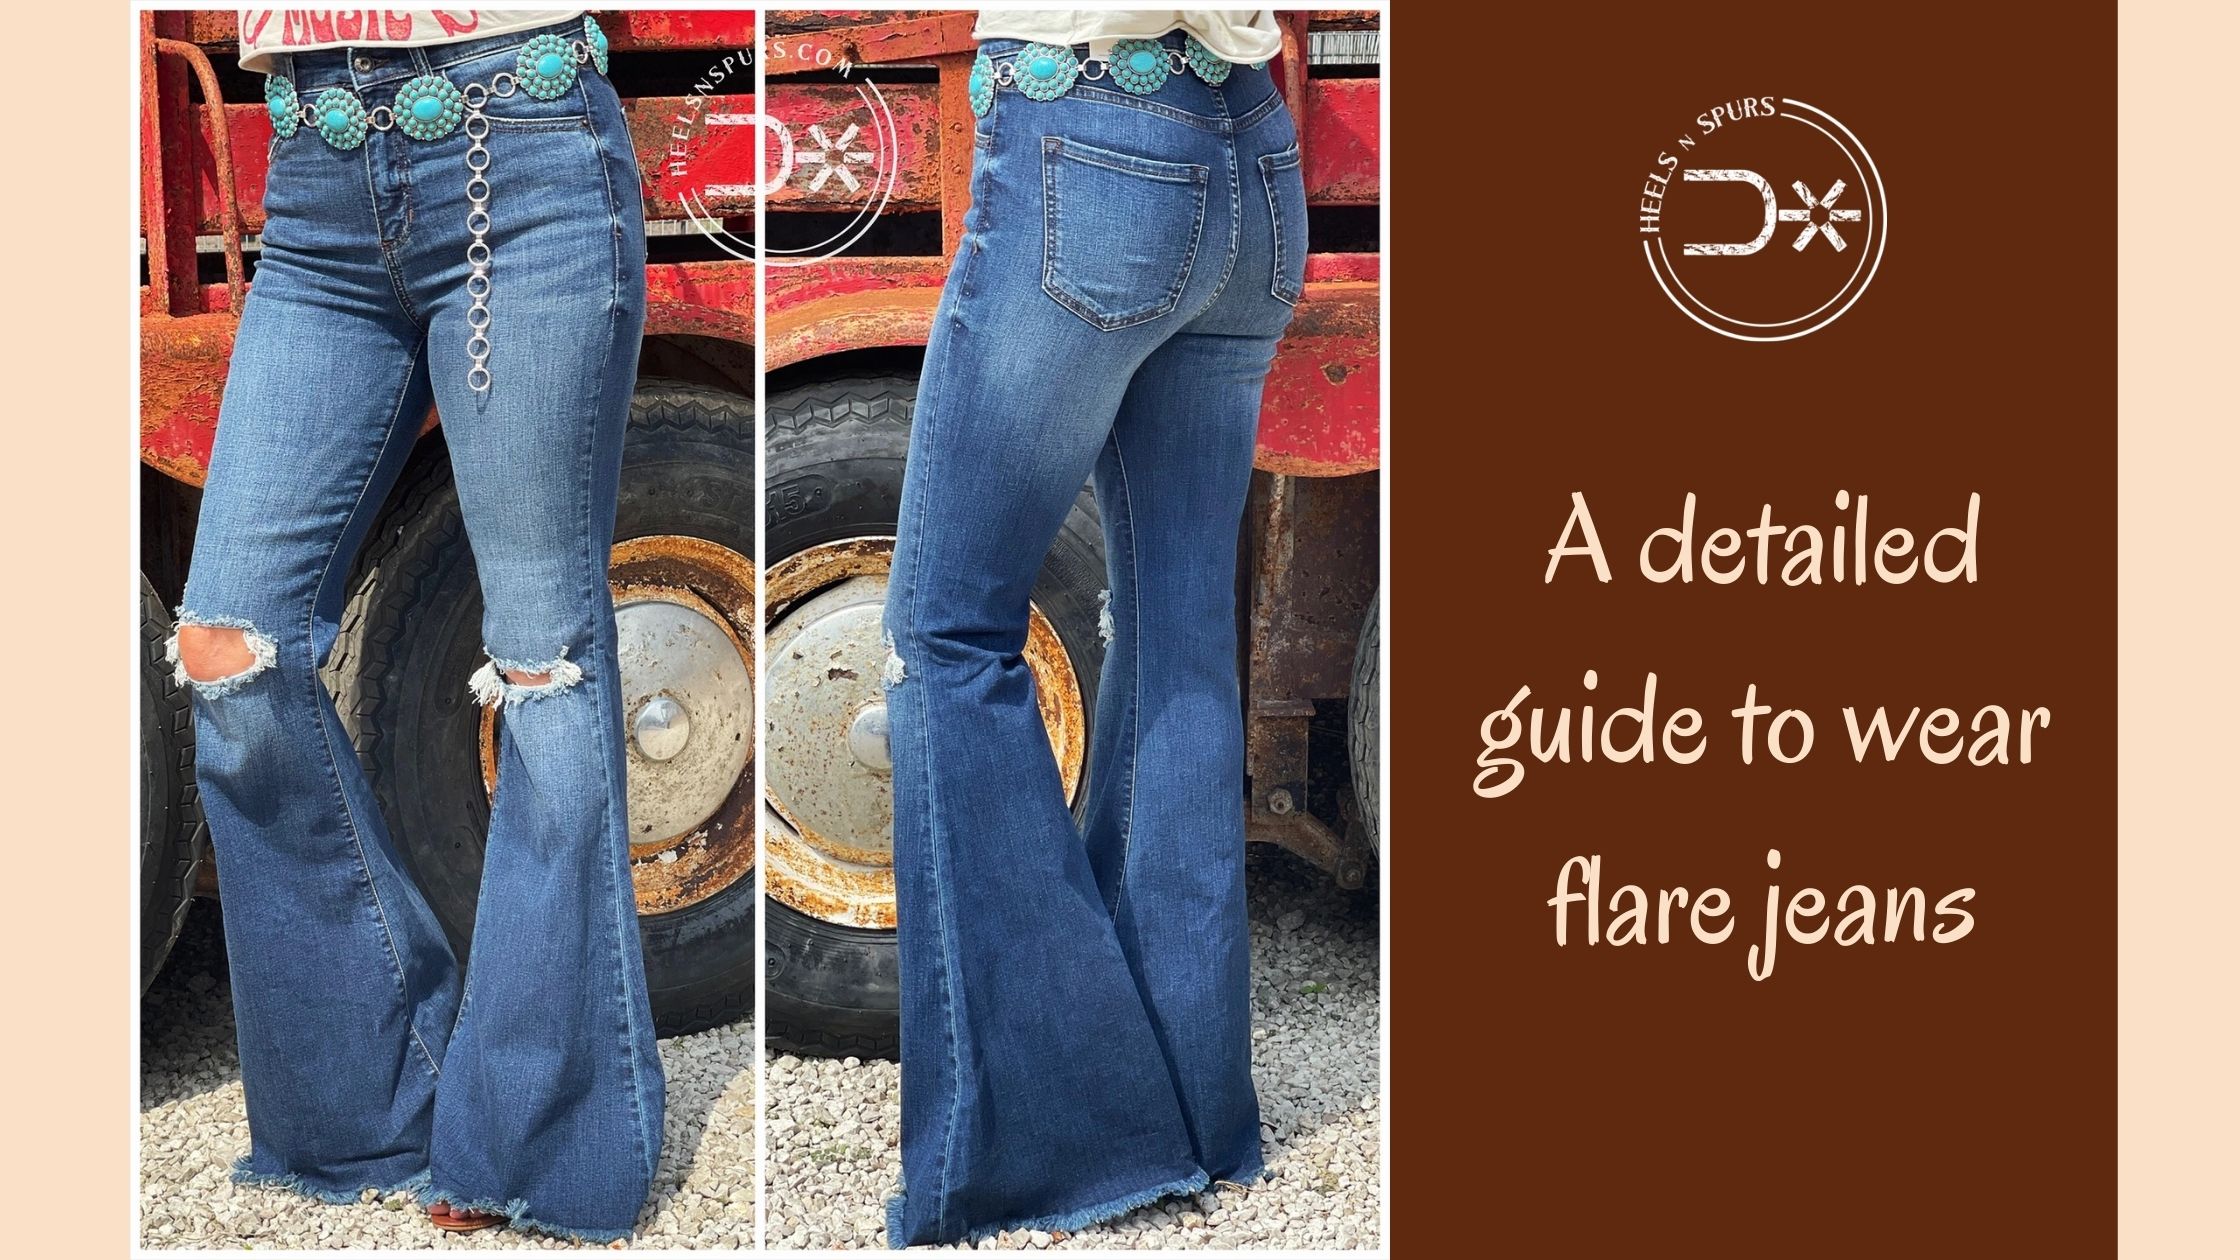 A detailed guide to wear flare jeans